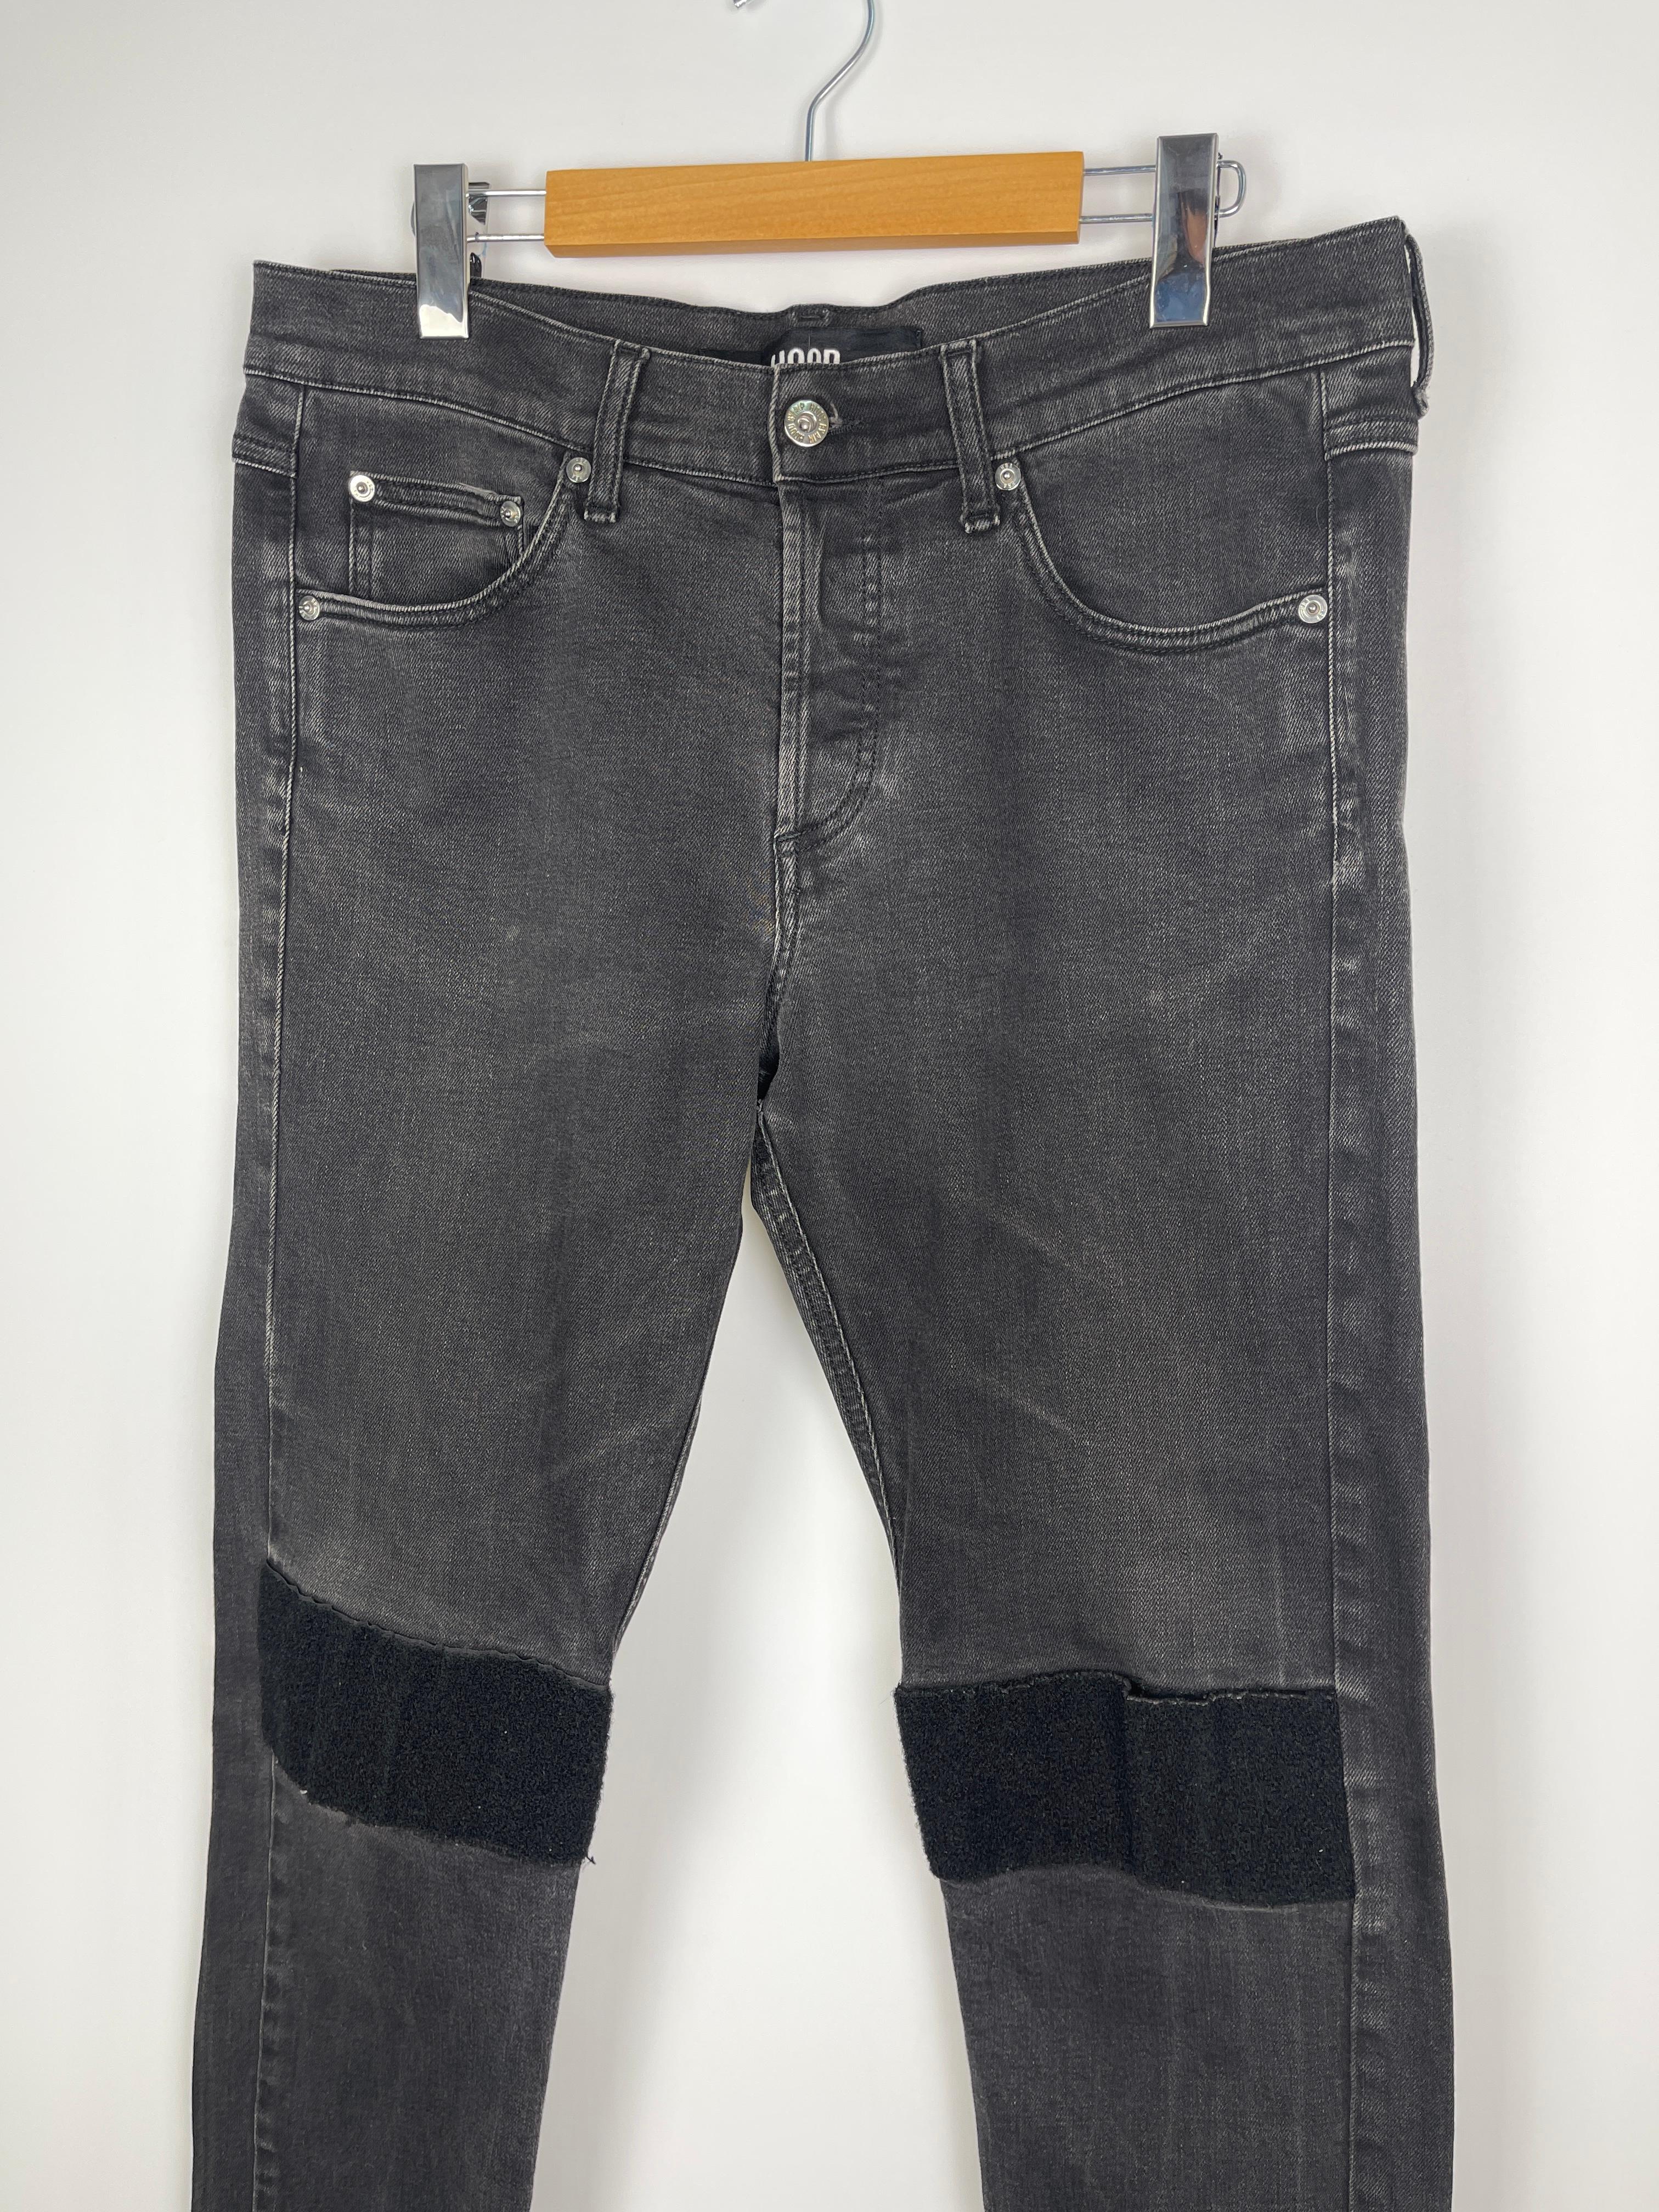 Hood By Air Taped Denim For Sale 4